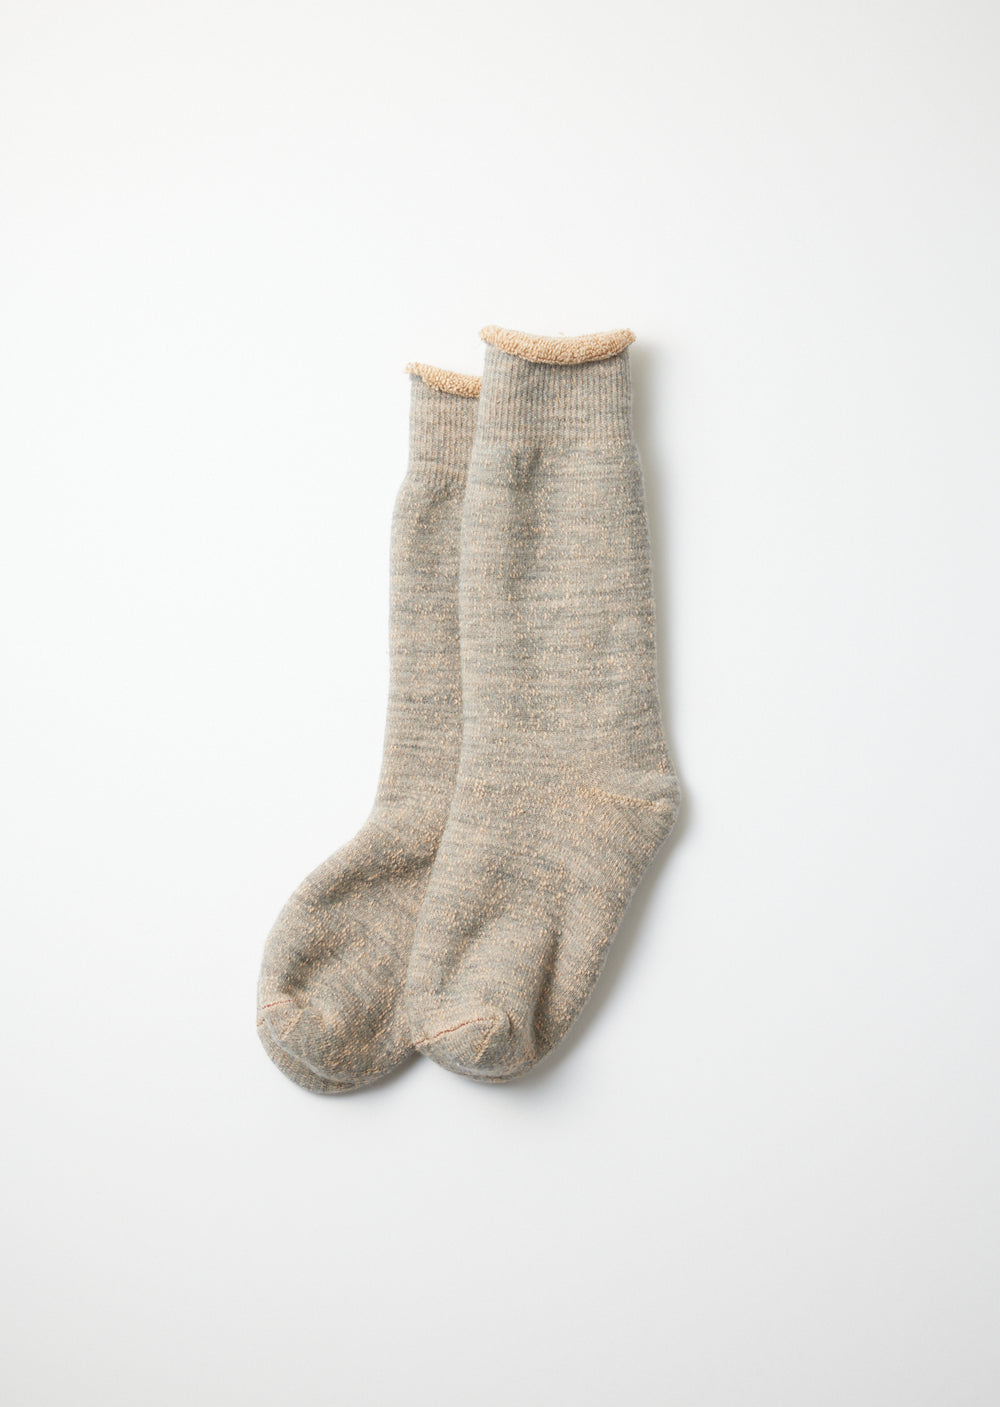 Double Face Crew Socks - Gray/Brown - R1001